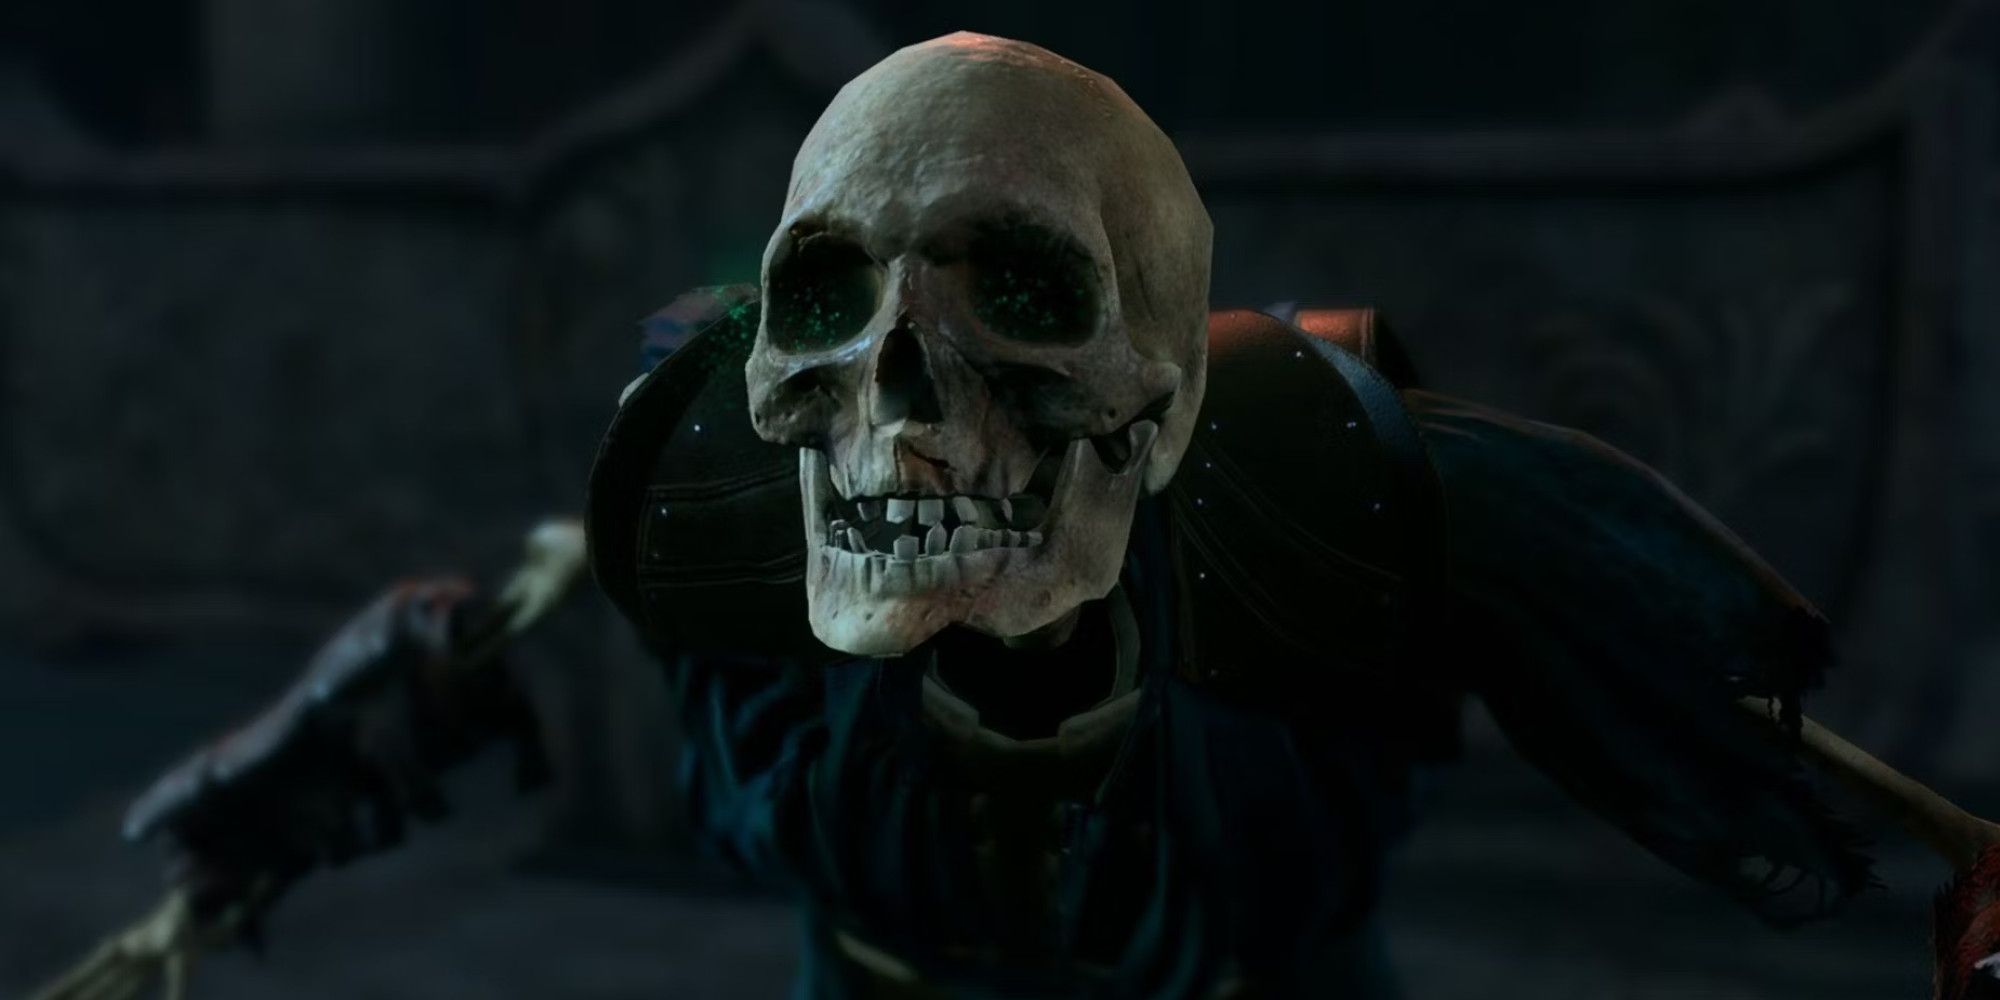 A skeleton with slightly glowing green eyes grinning towards the camera